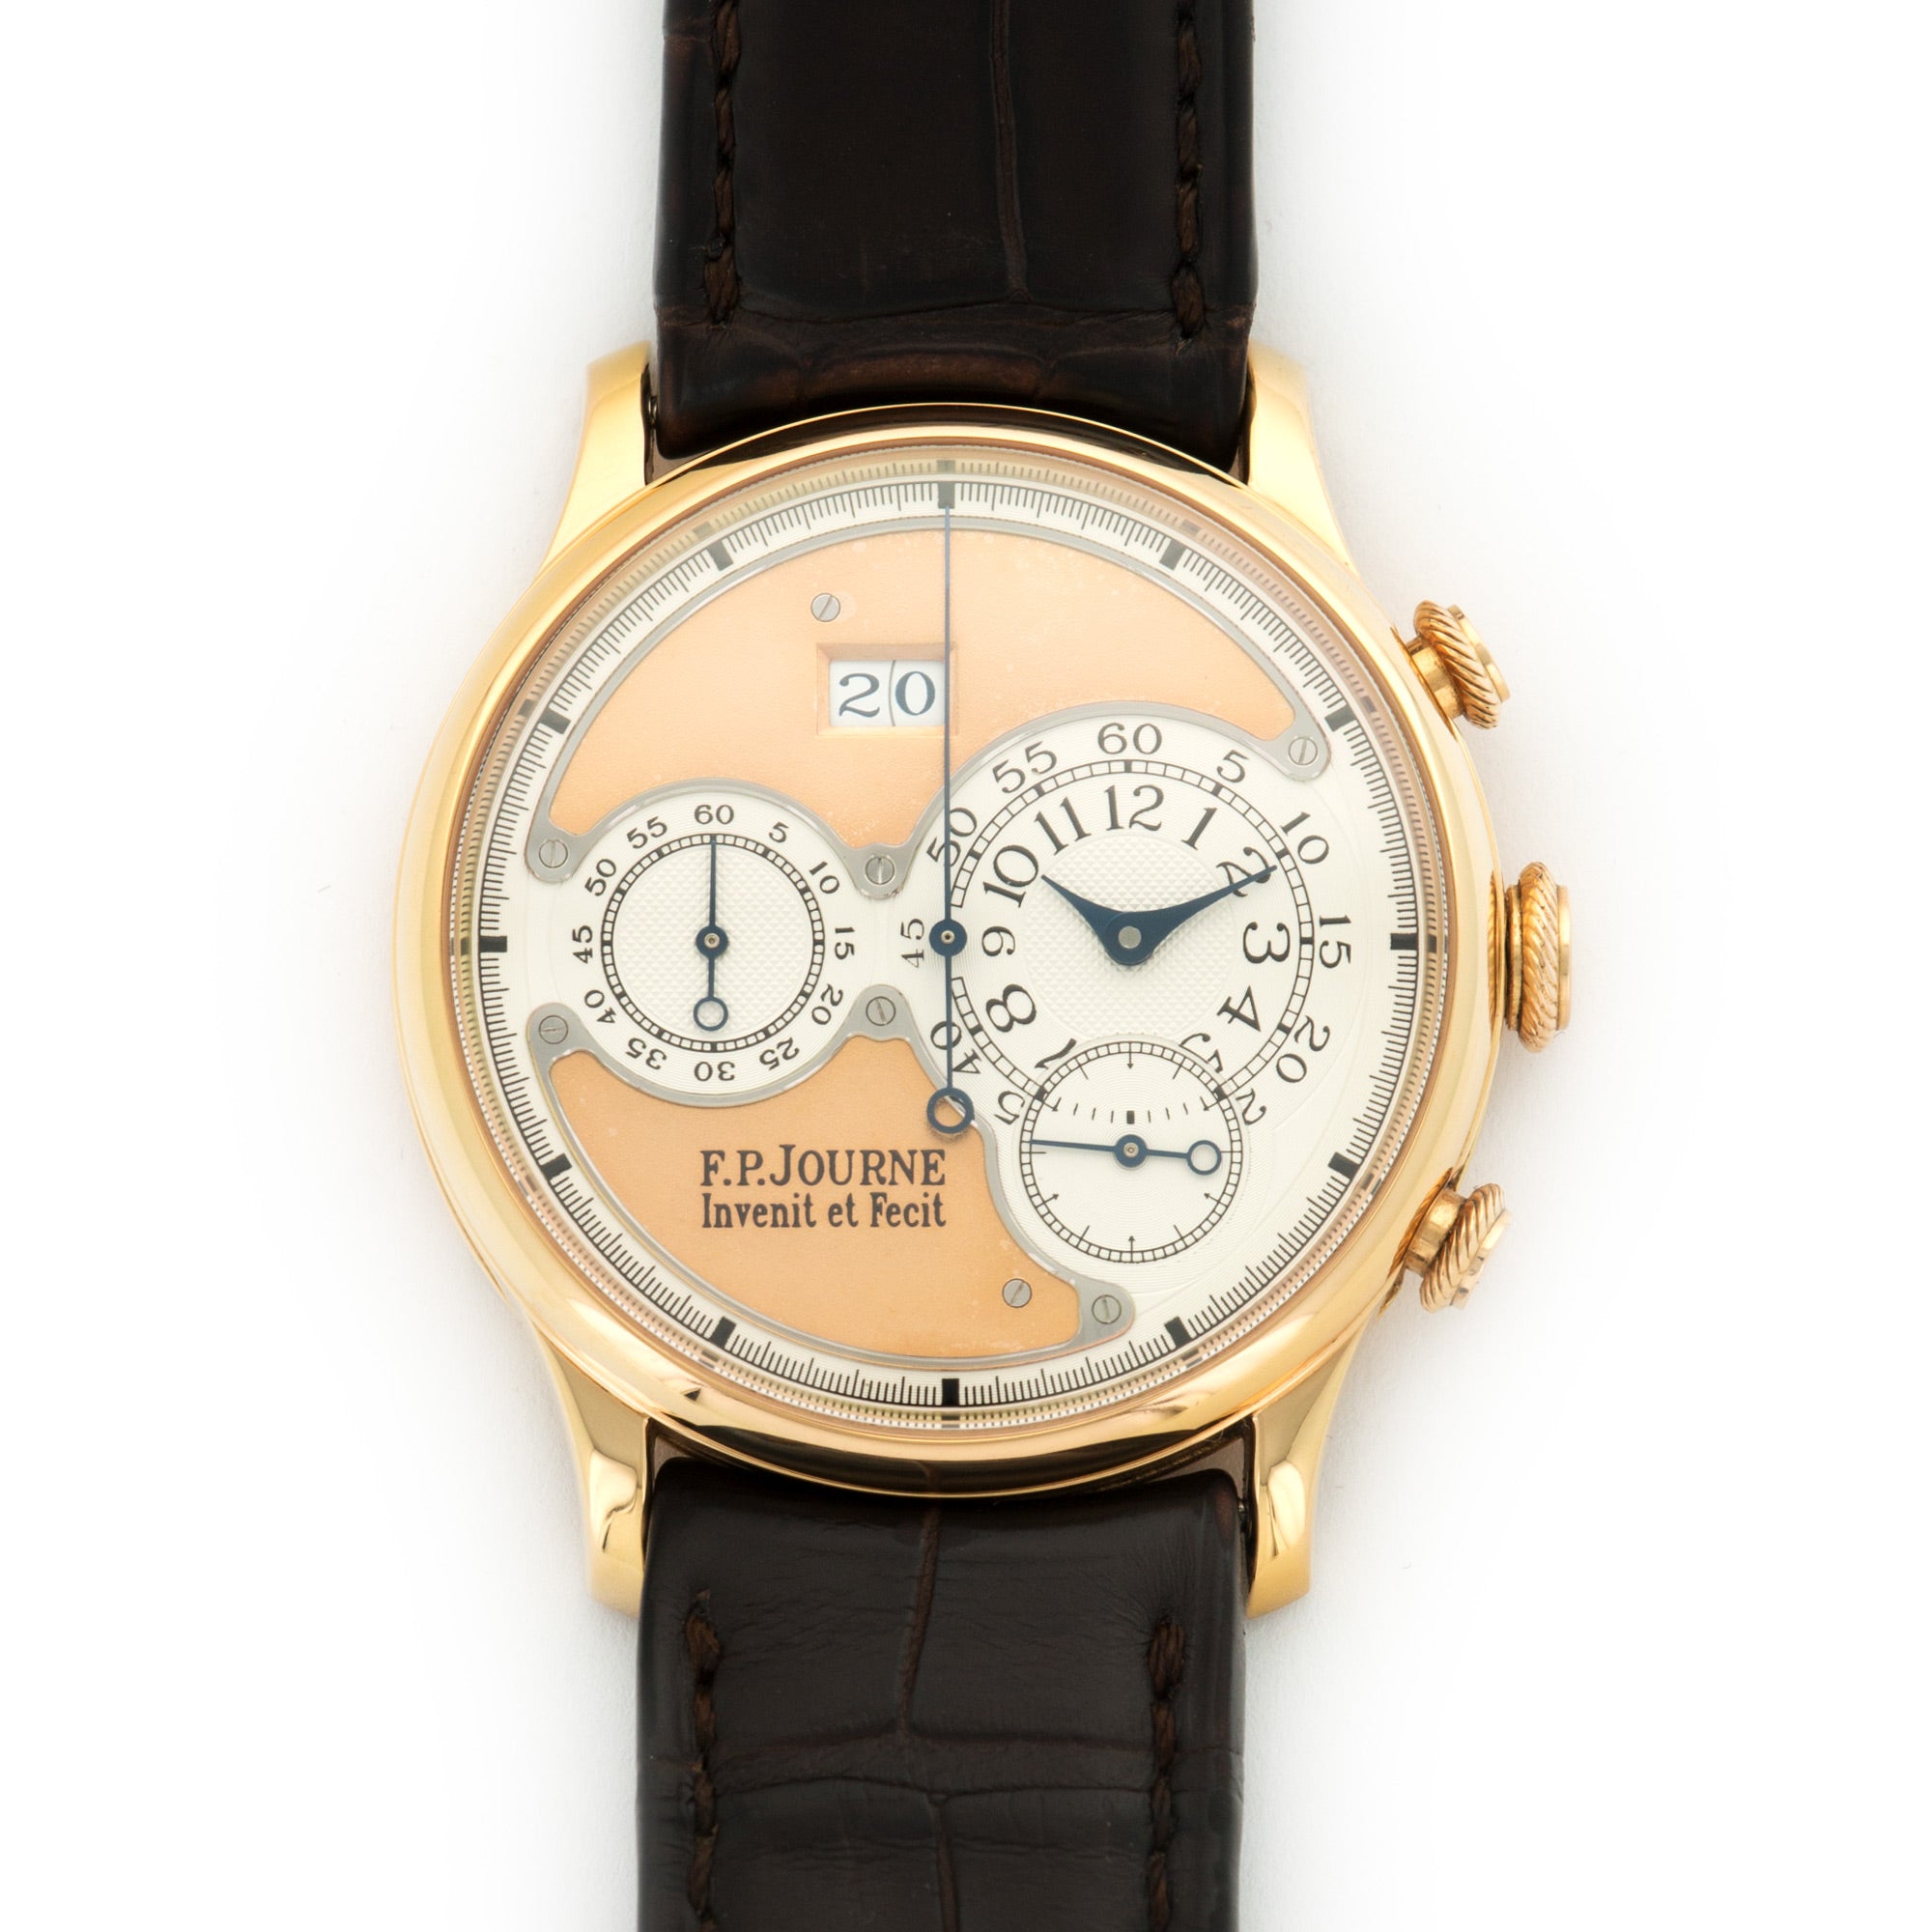 FP Journe - F.P. Journe Rose Gold Octa Chronograph Watch - The Keystone Watches